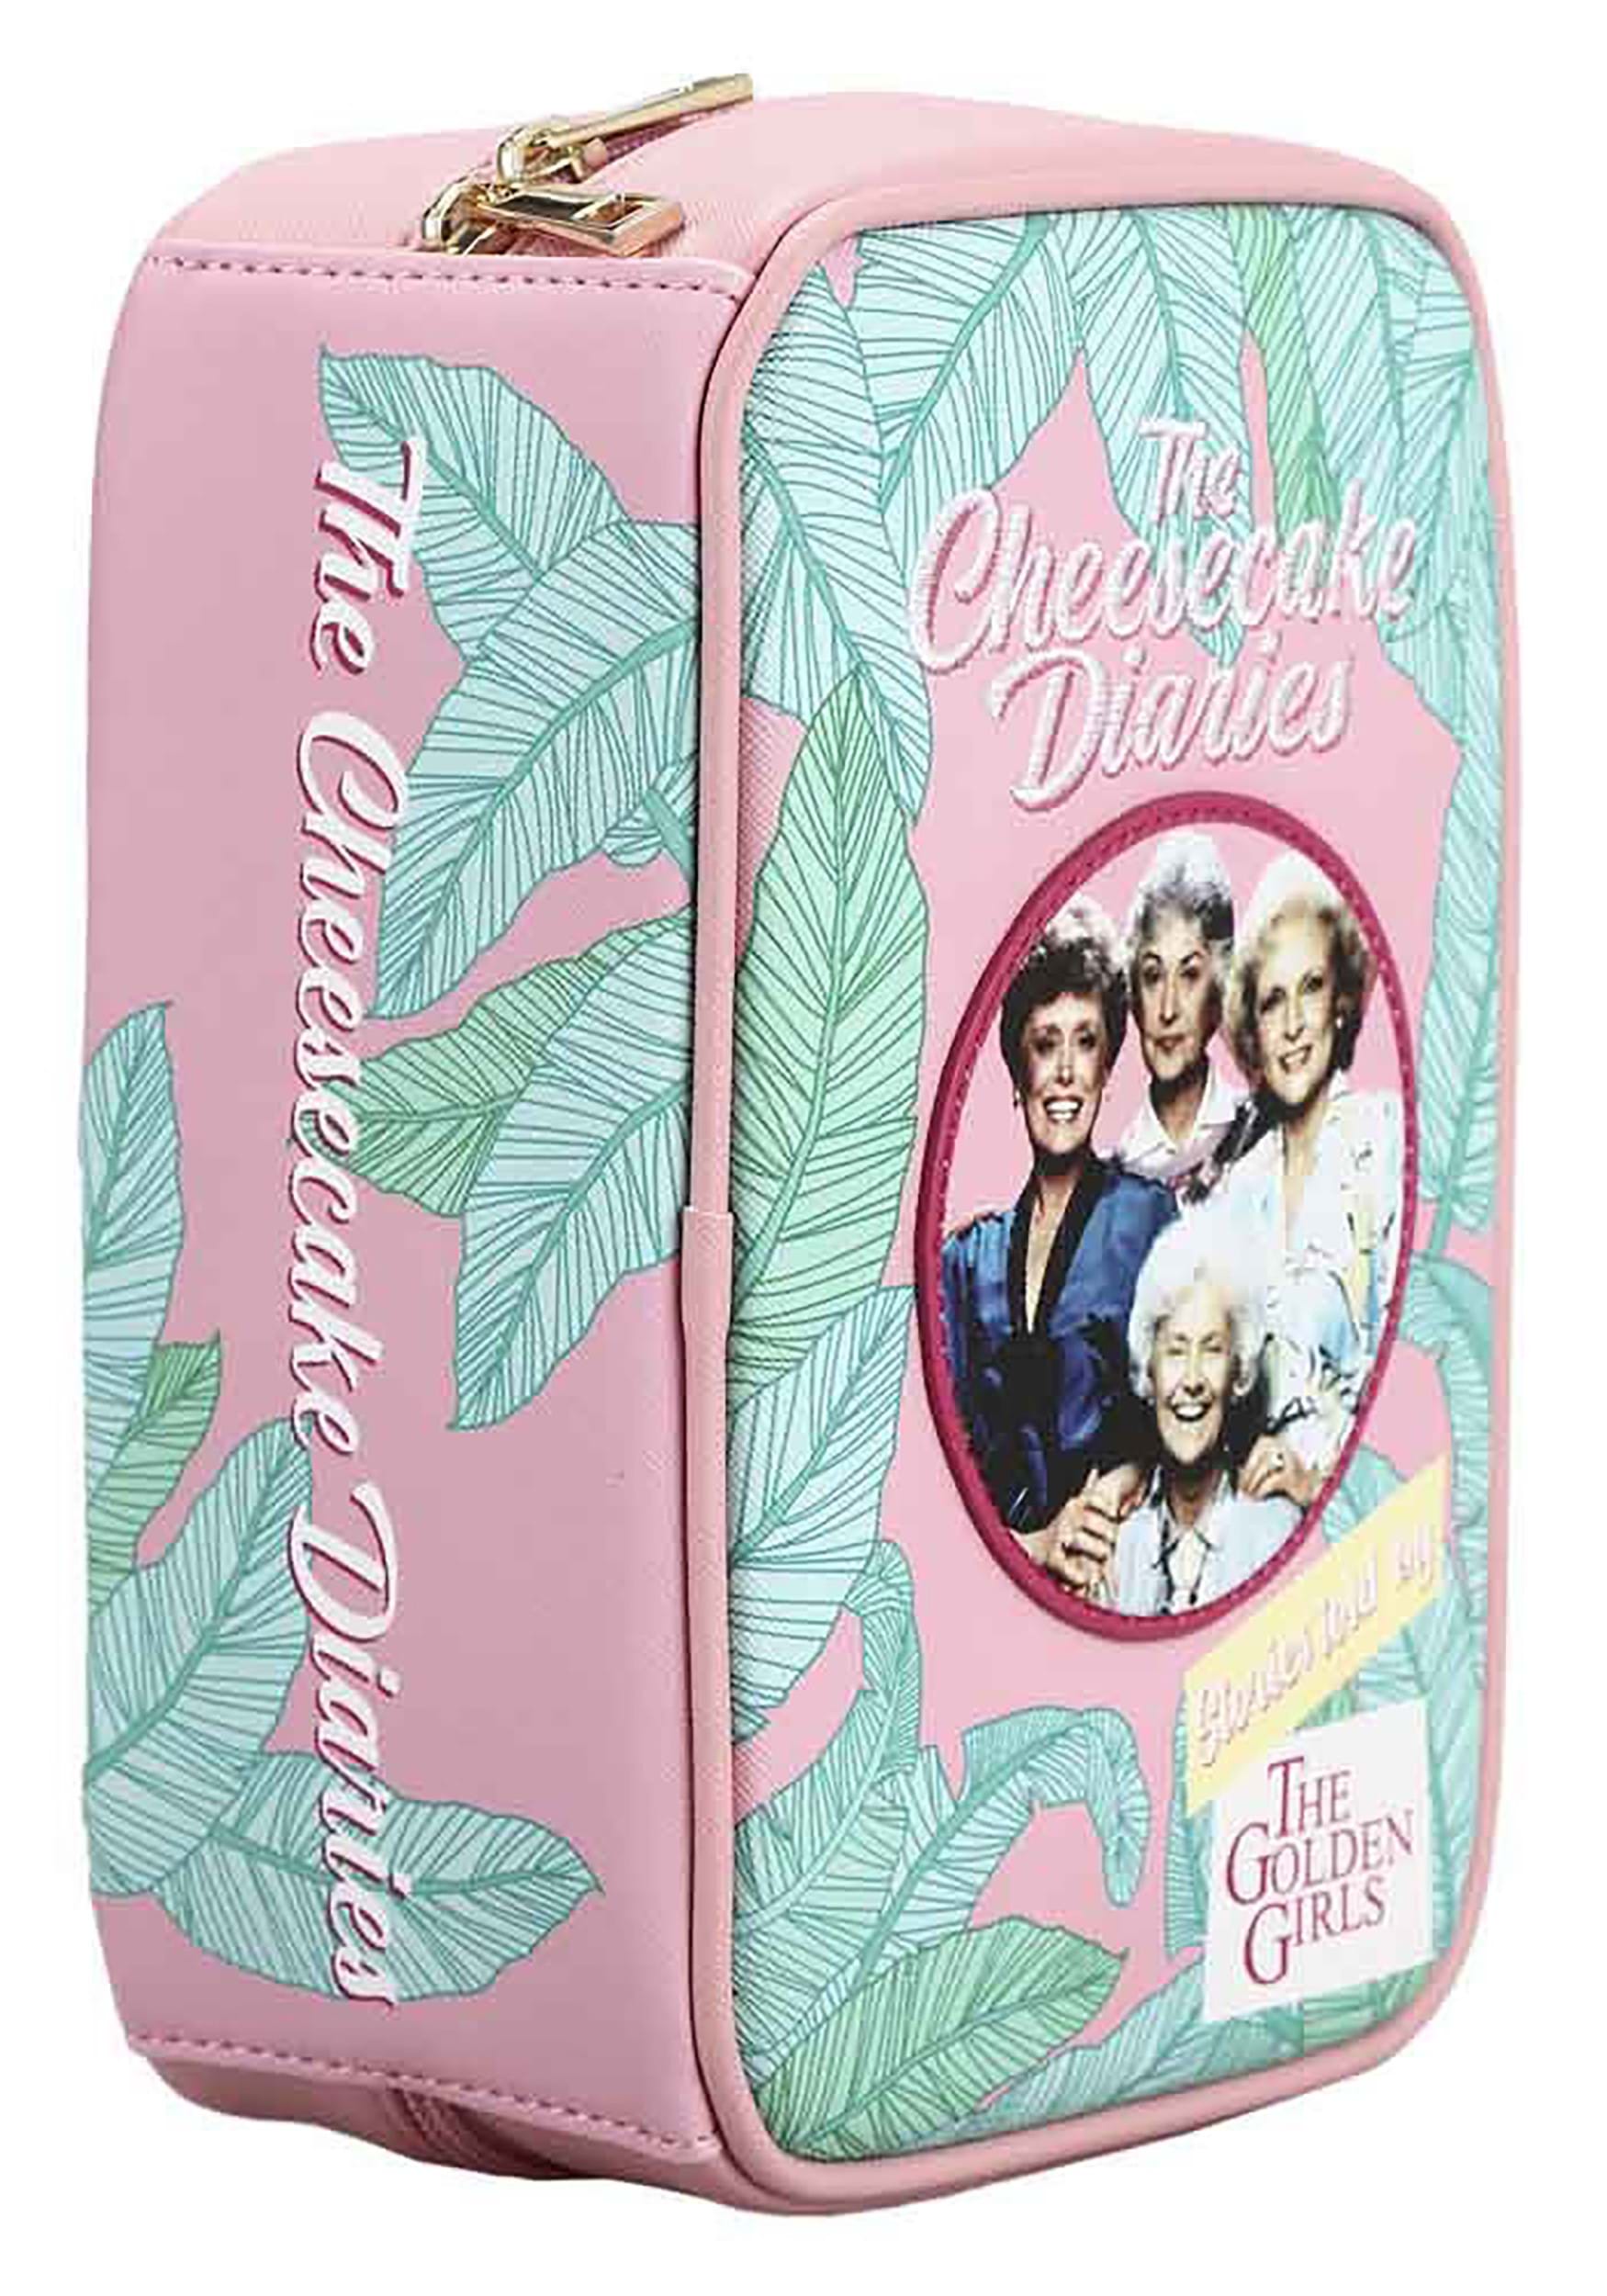 The Cheesecake Diaries The Golden Girls Travel Cosmetic Bag